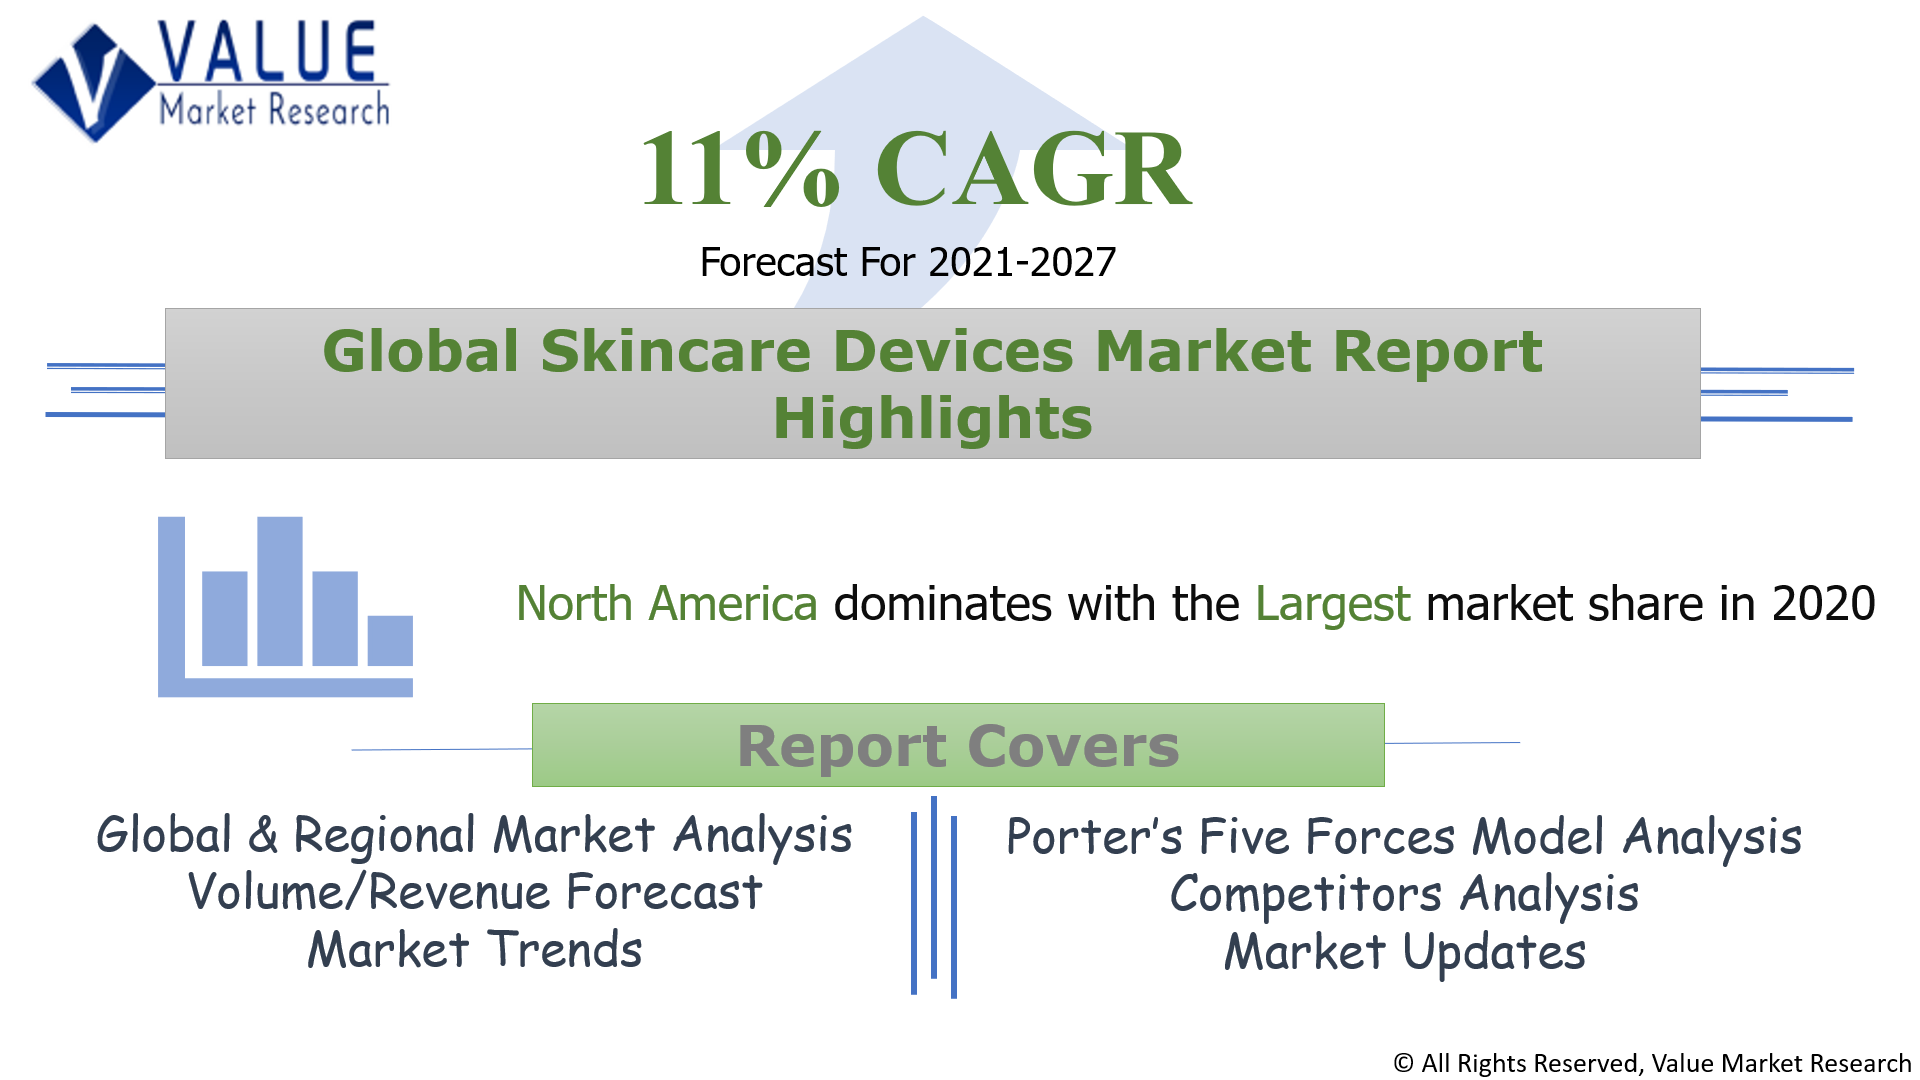 Global Skincare Devices Market Share